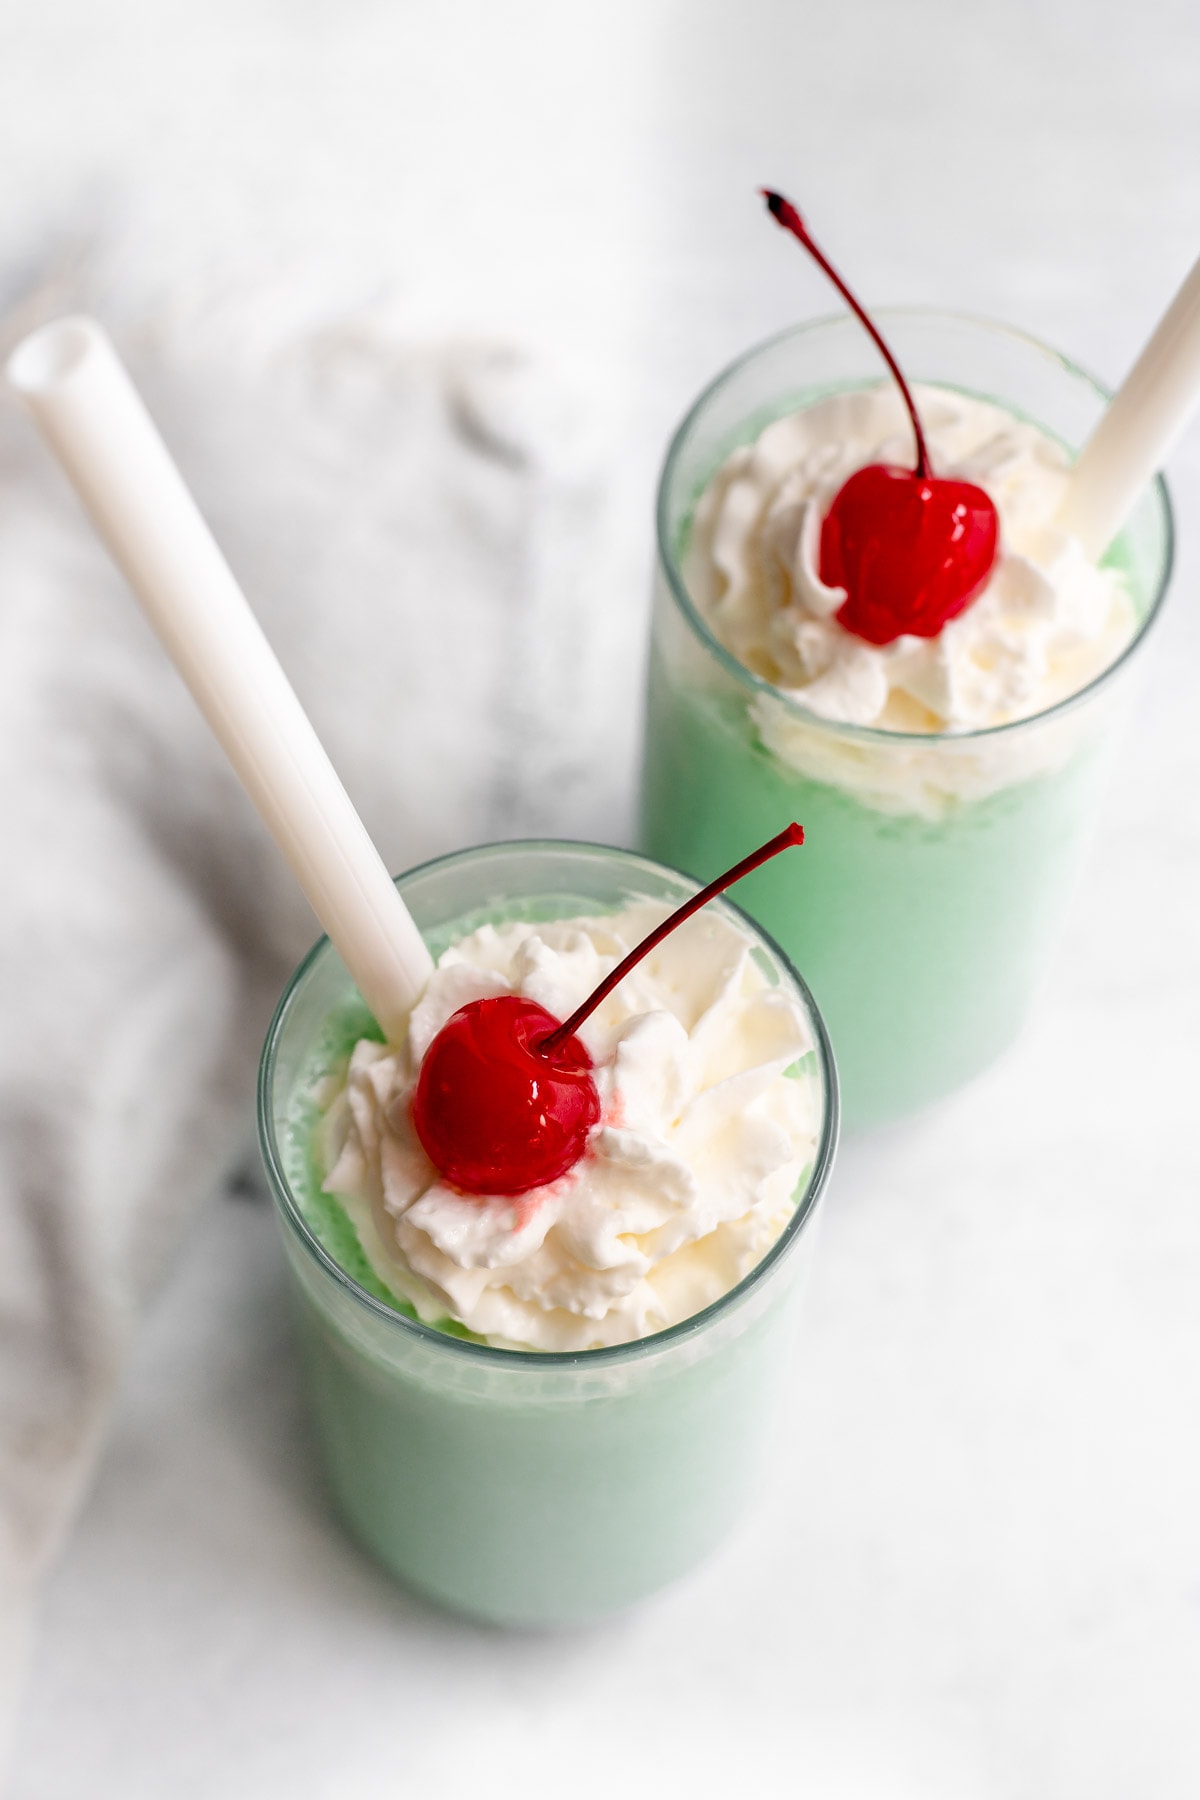 Two shamrock shakes in glasses topped with whipped cream and maraschino cherries